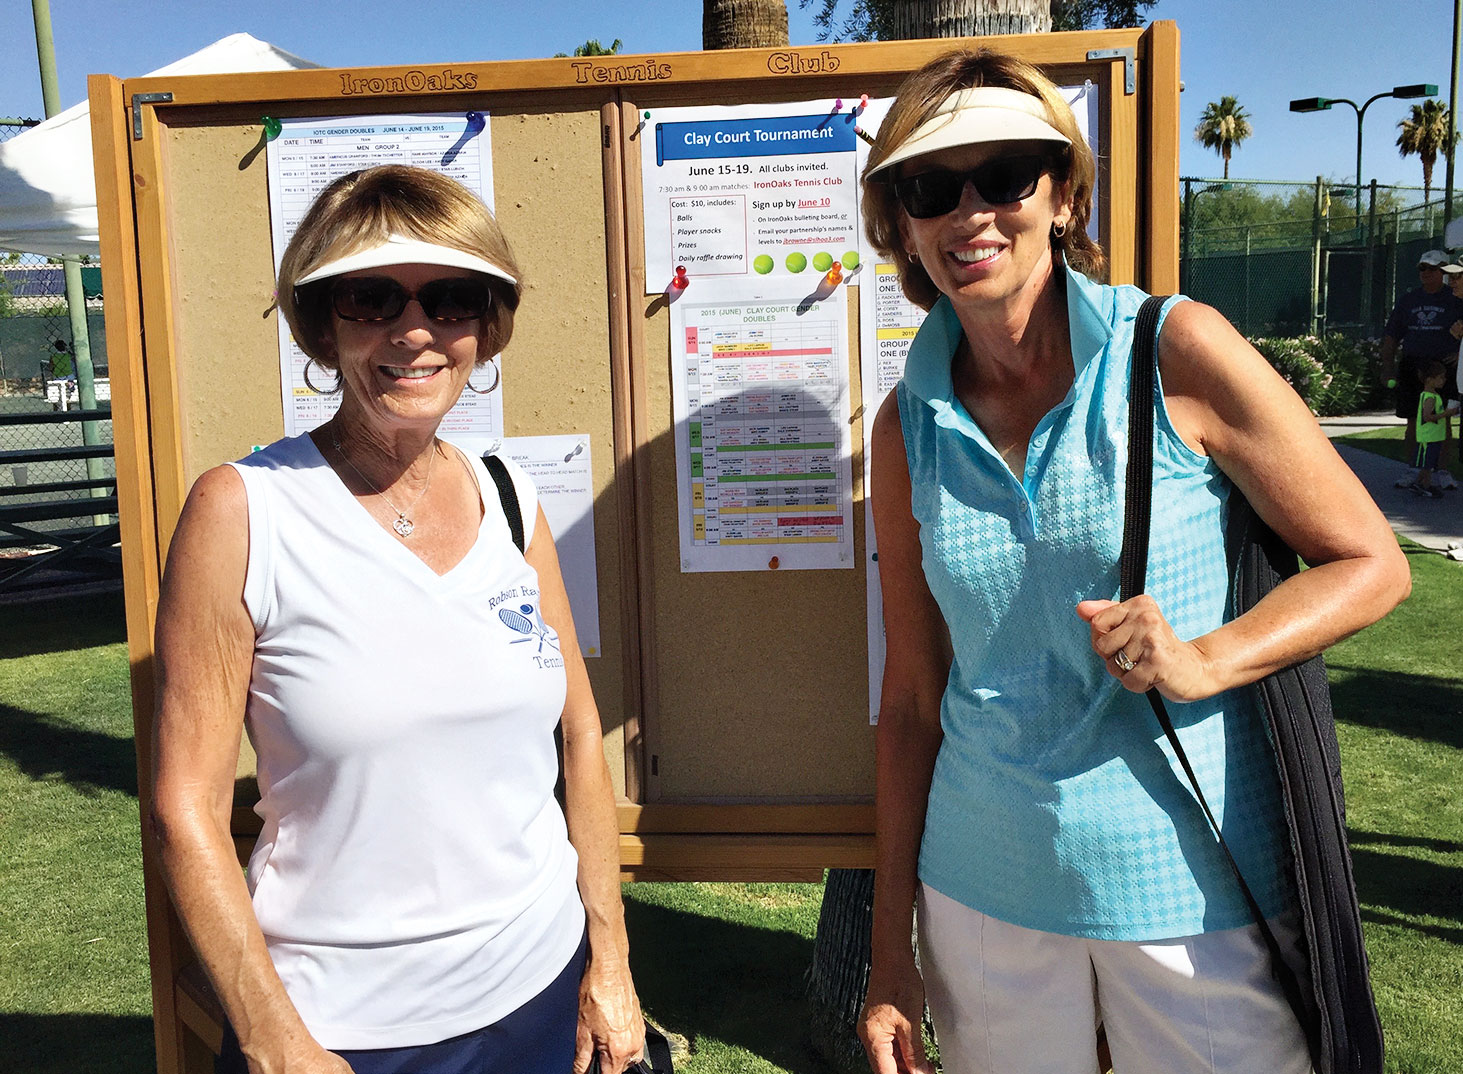 Phyllis Gayer and Dee Lee, first place in 6.0 Women’s Doubles division